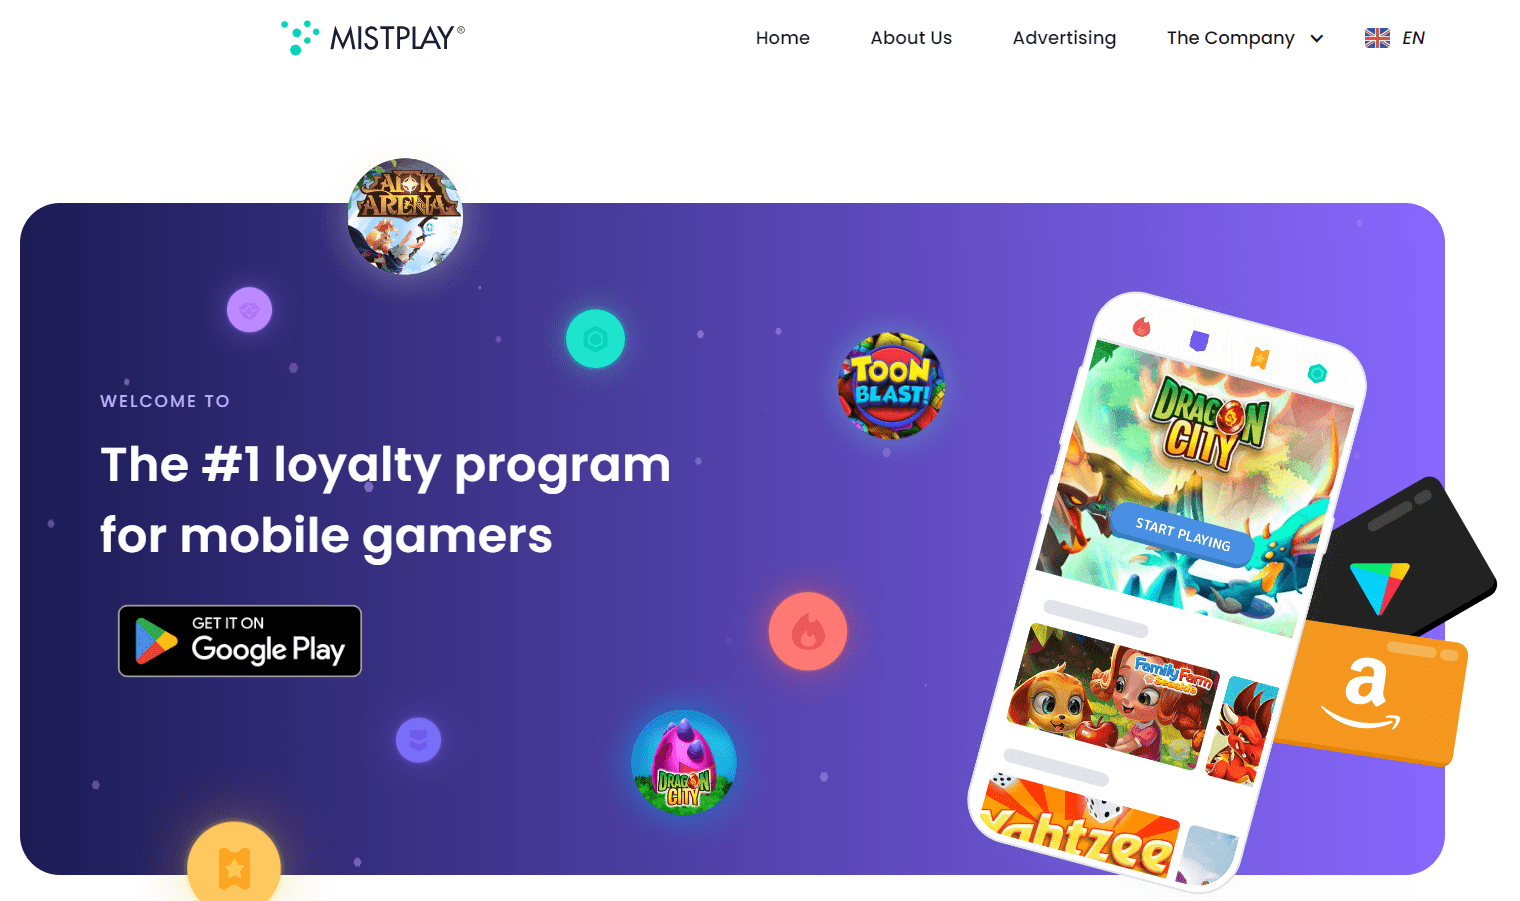 Mistplay App: Play Games to Make Money?